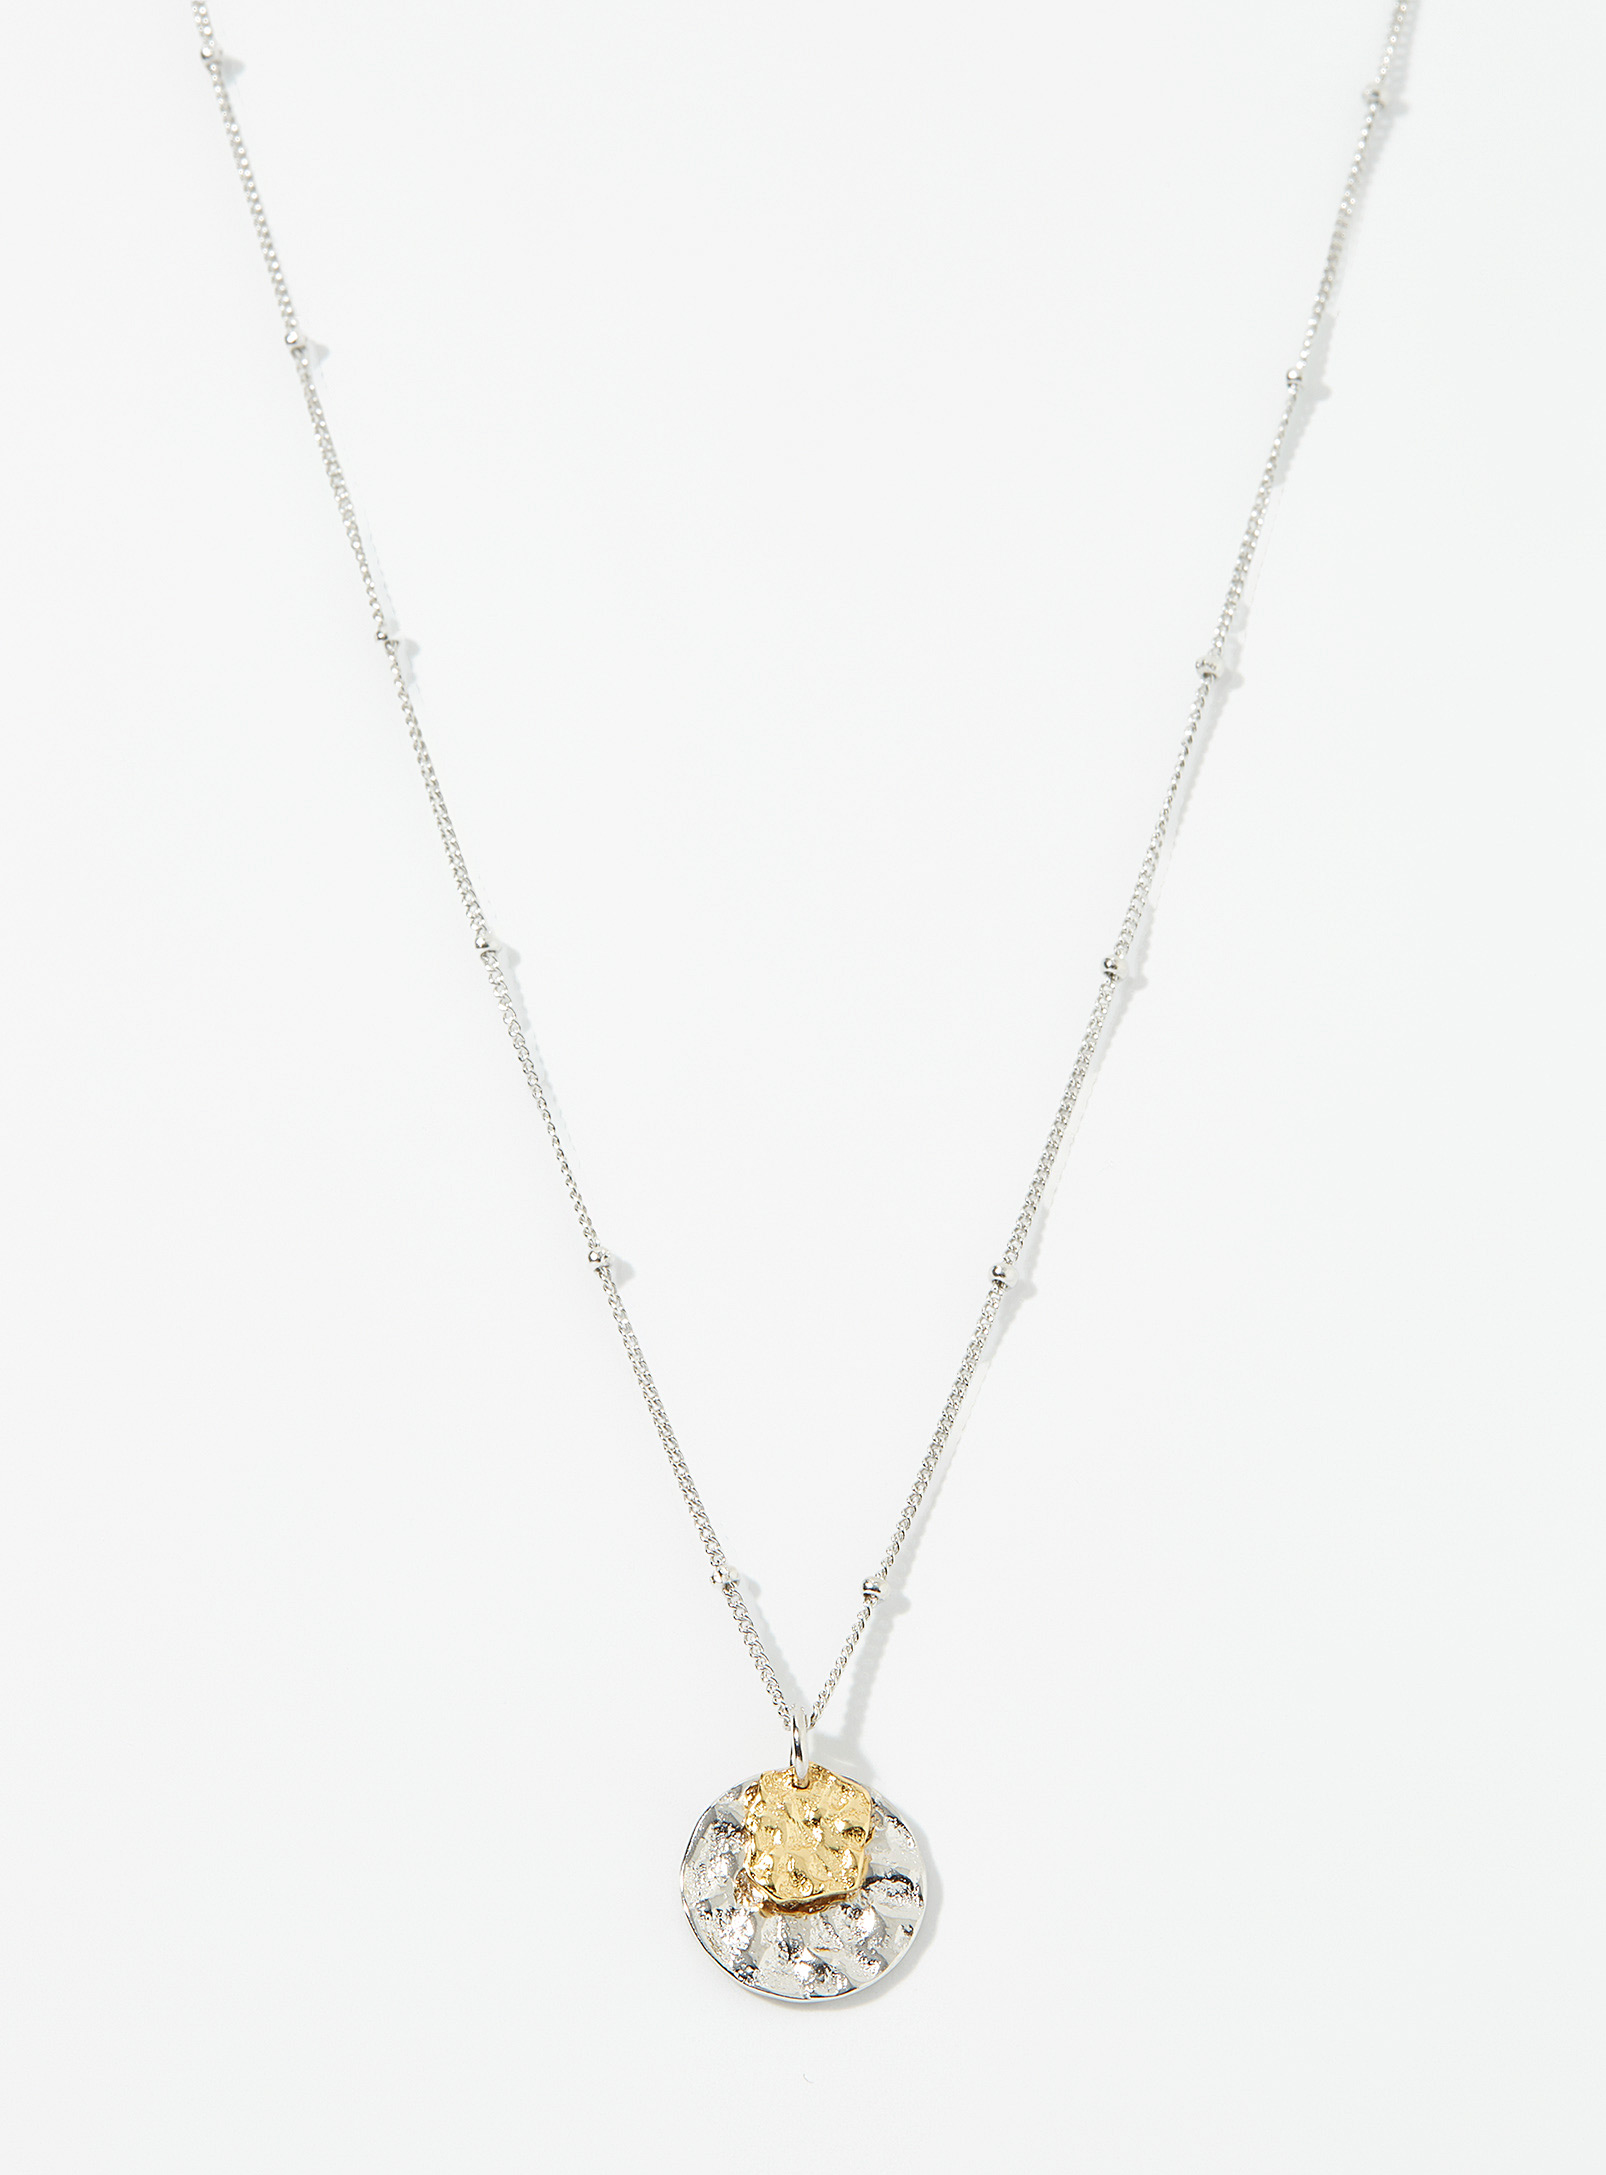 Simons - Women's Hammered-charm necklace